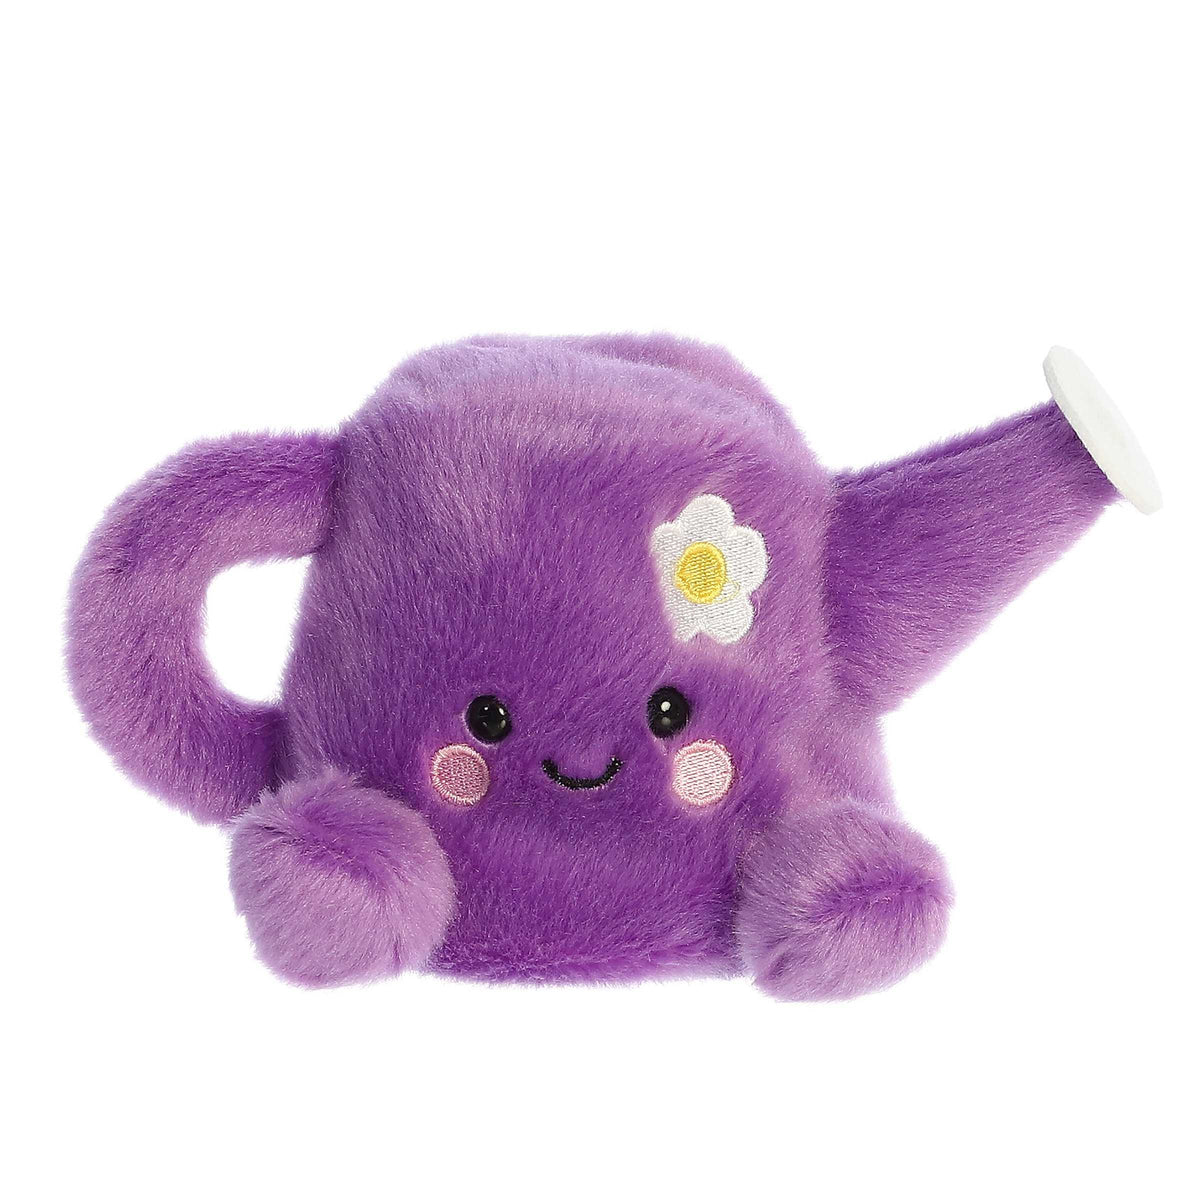 Tiny flower watering can plush toy with purple fur body filled with bean pellets, a white flower and smiling face embroidery